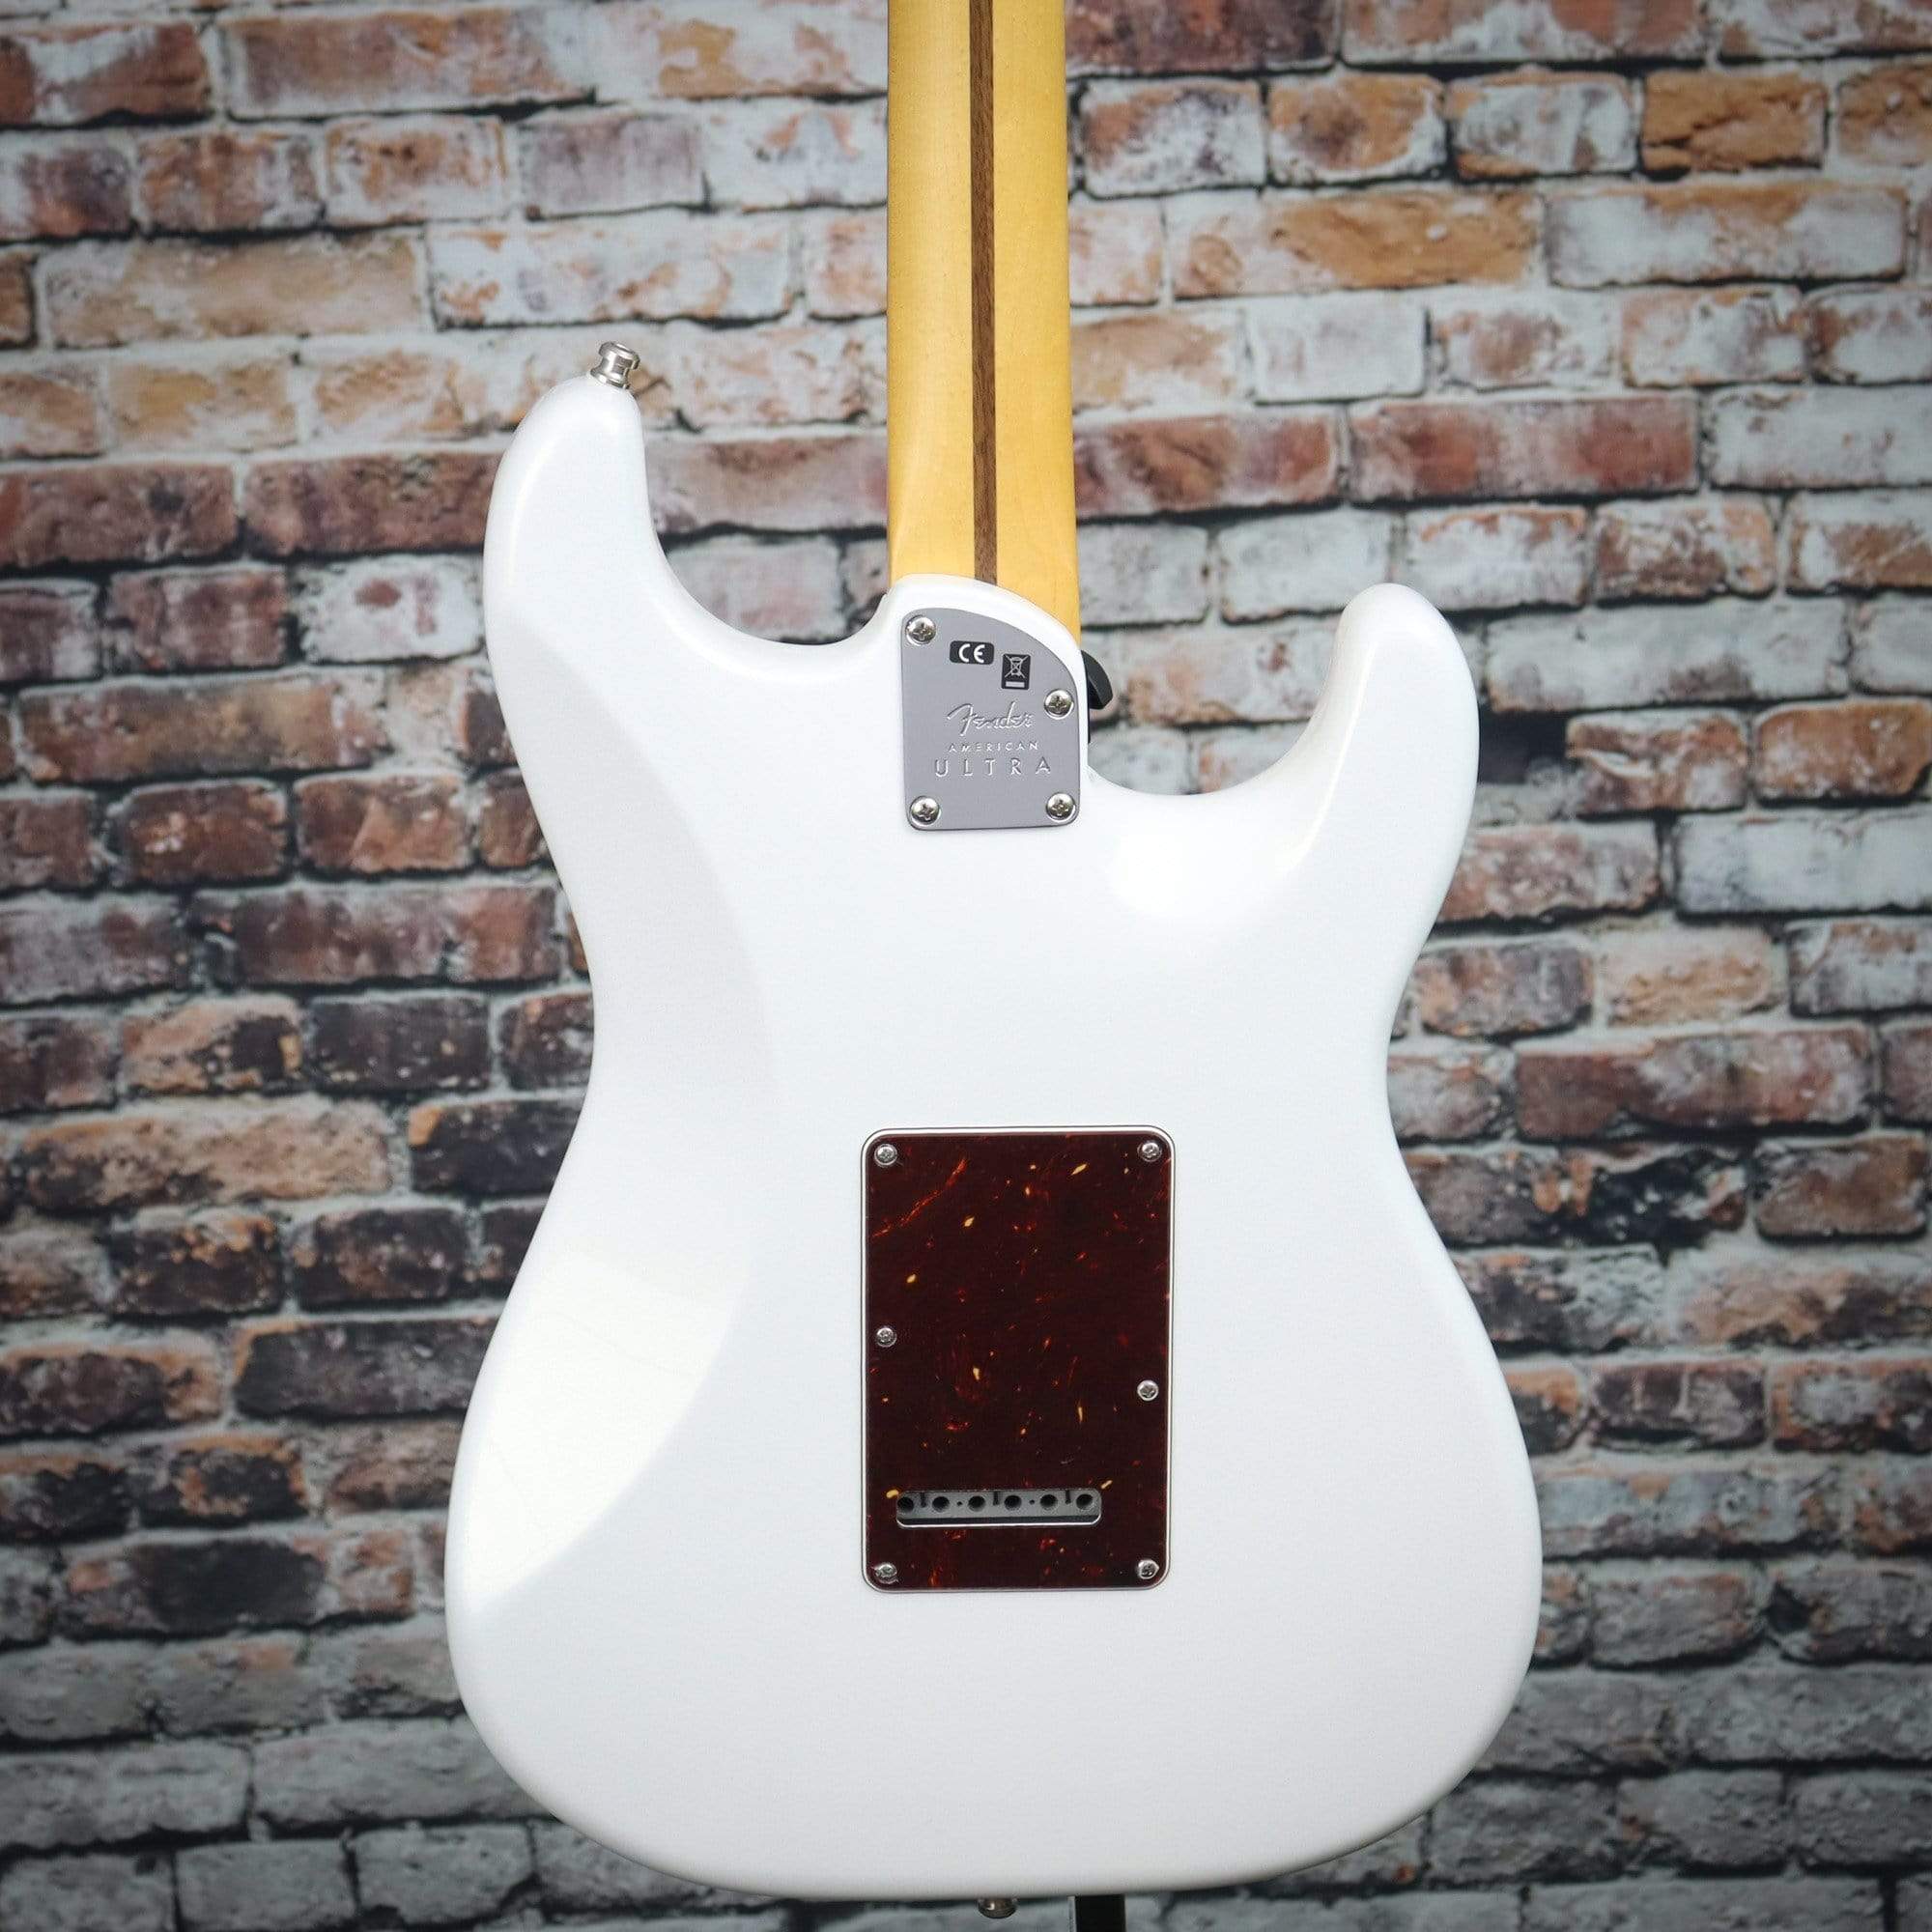 Fender American Ultra Stratocaster | Left Handed | Arctic Pearl